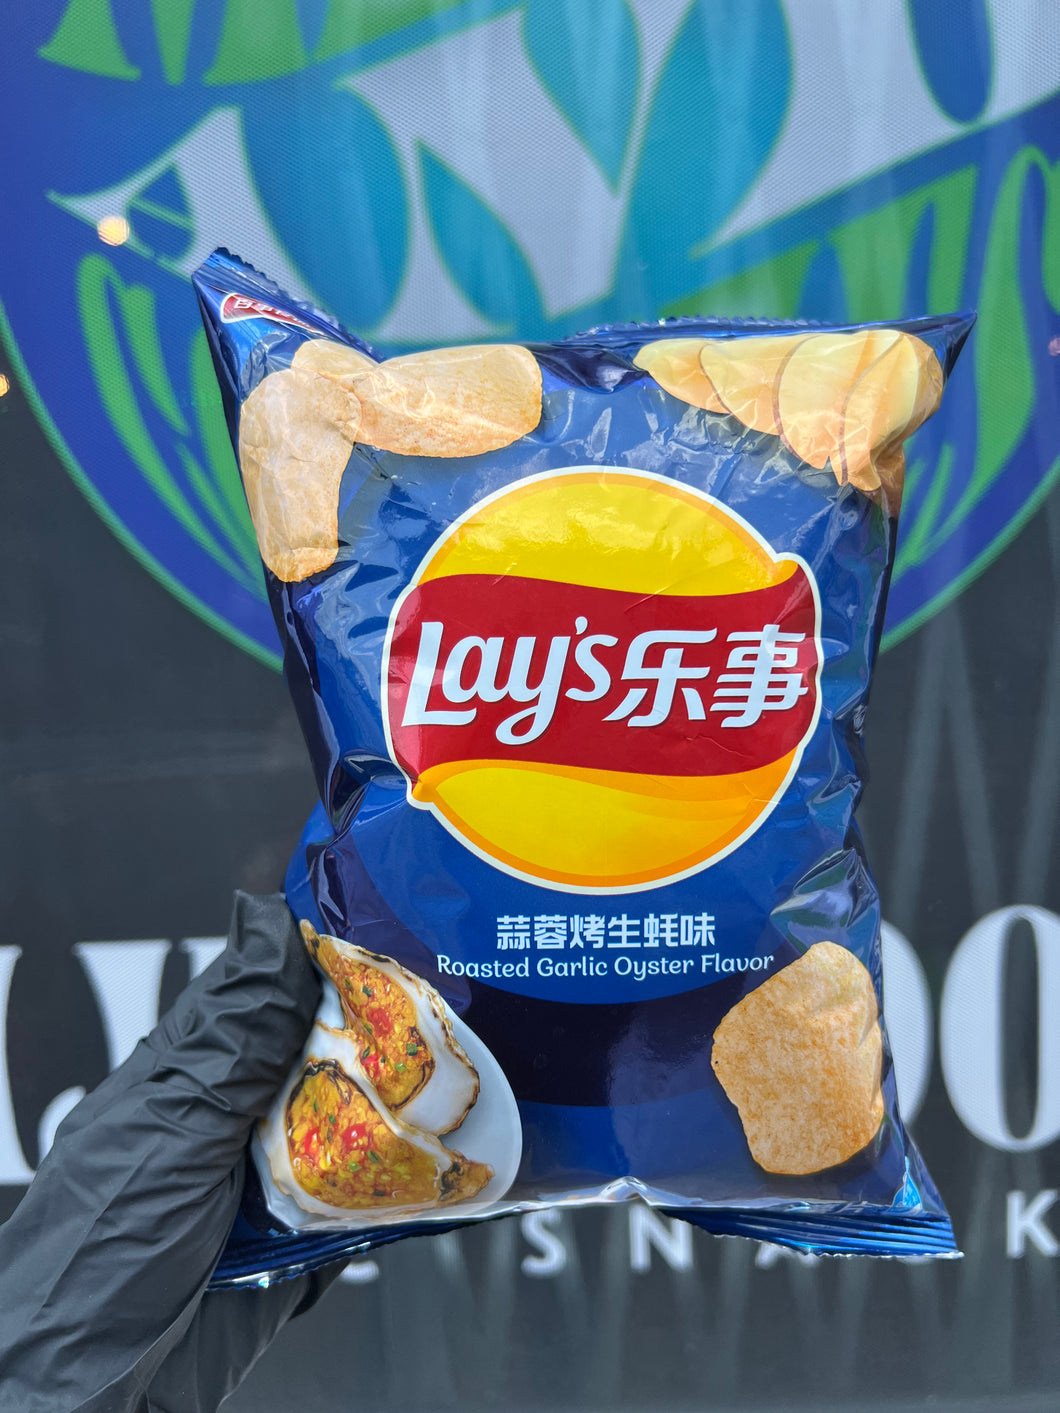 Lay's Roasted Garlic Oyster Potato Chips